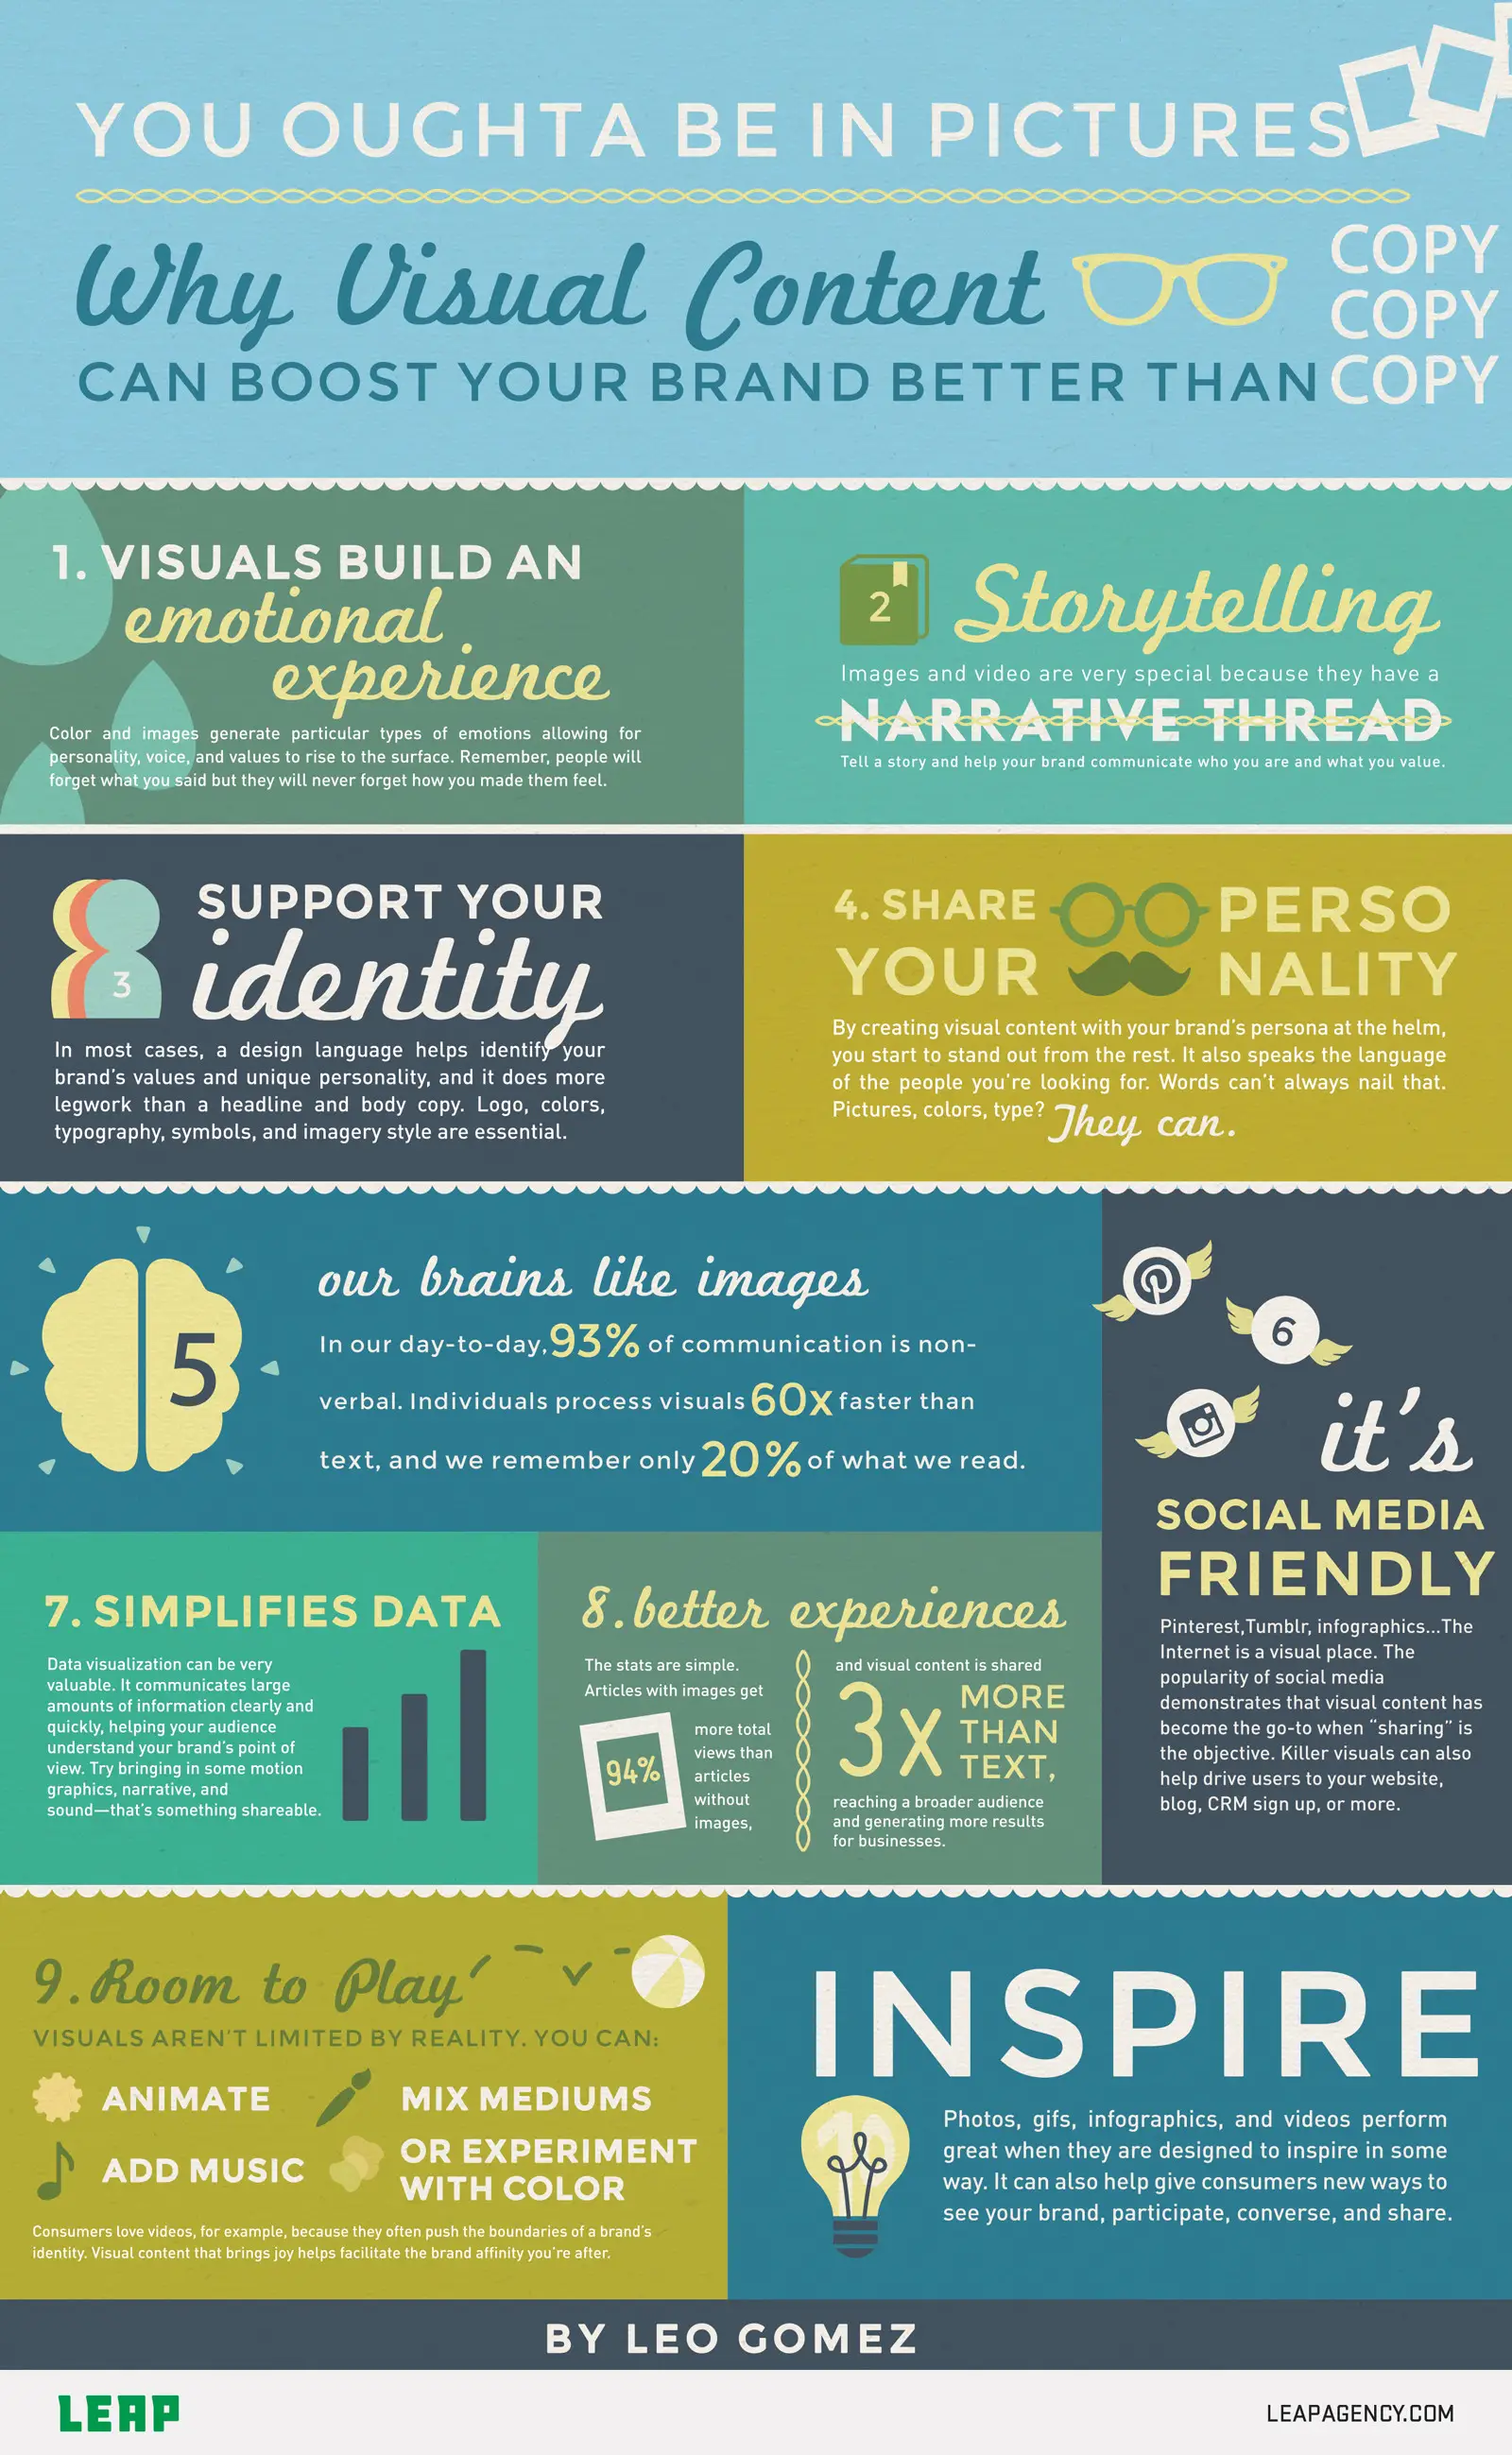 wersm leap agency why visual content can boost your brand better than copy infographic